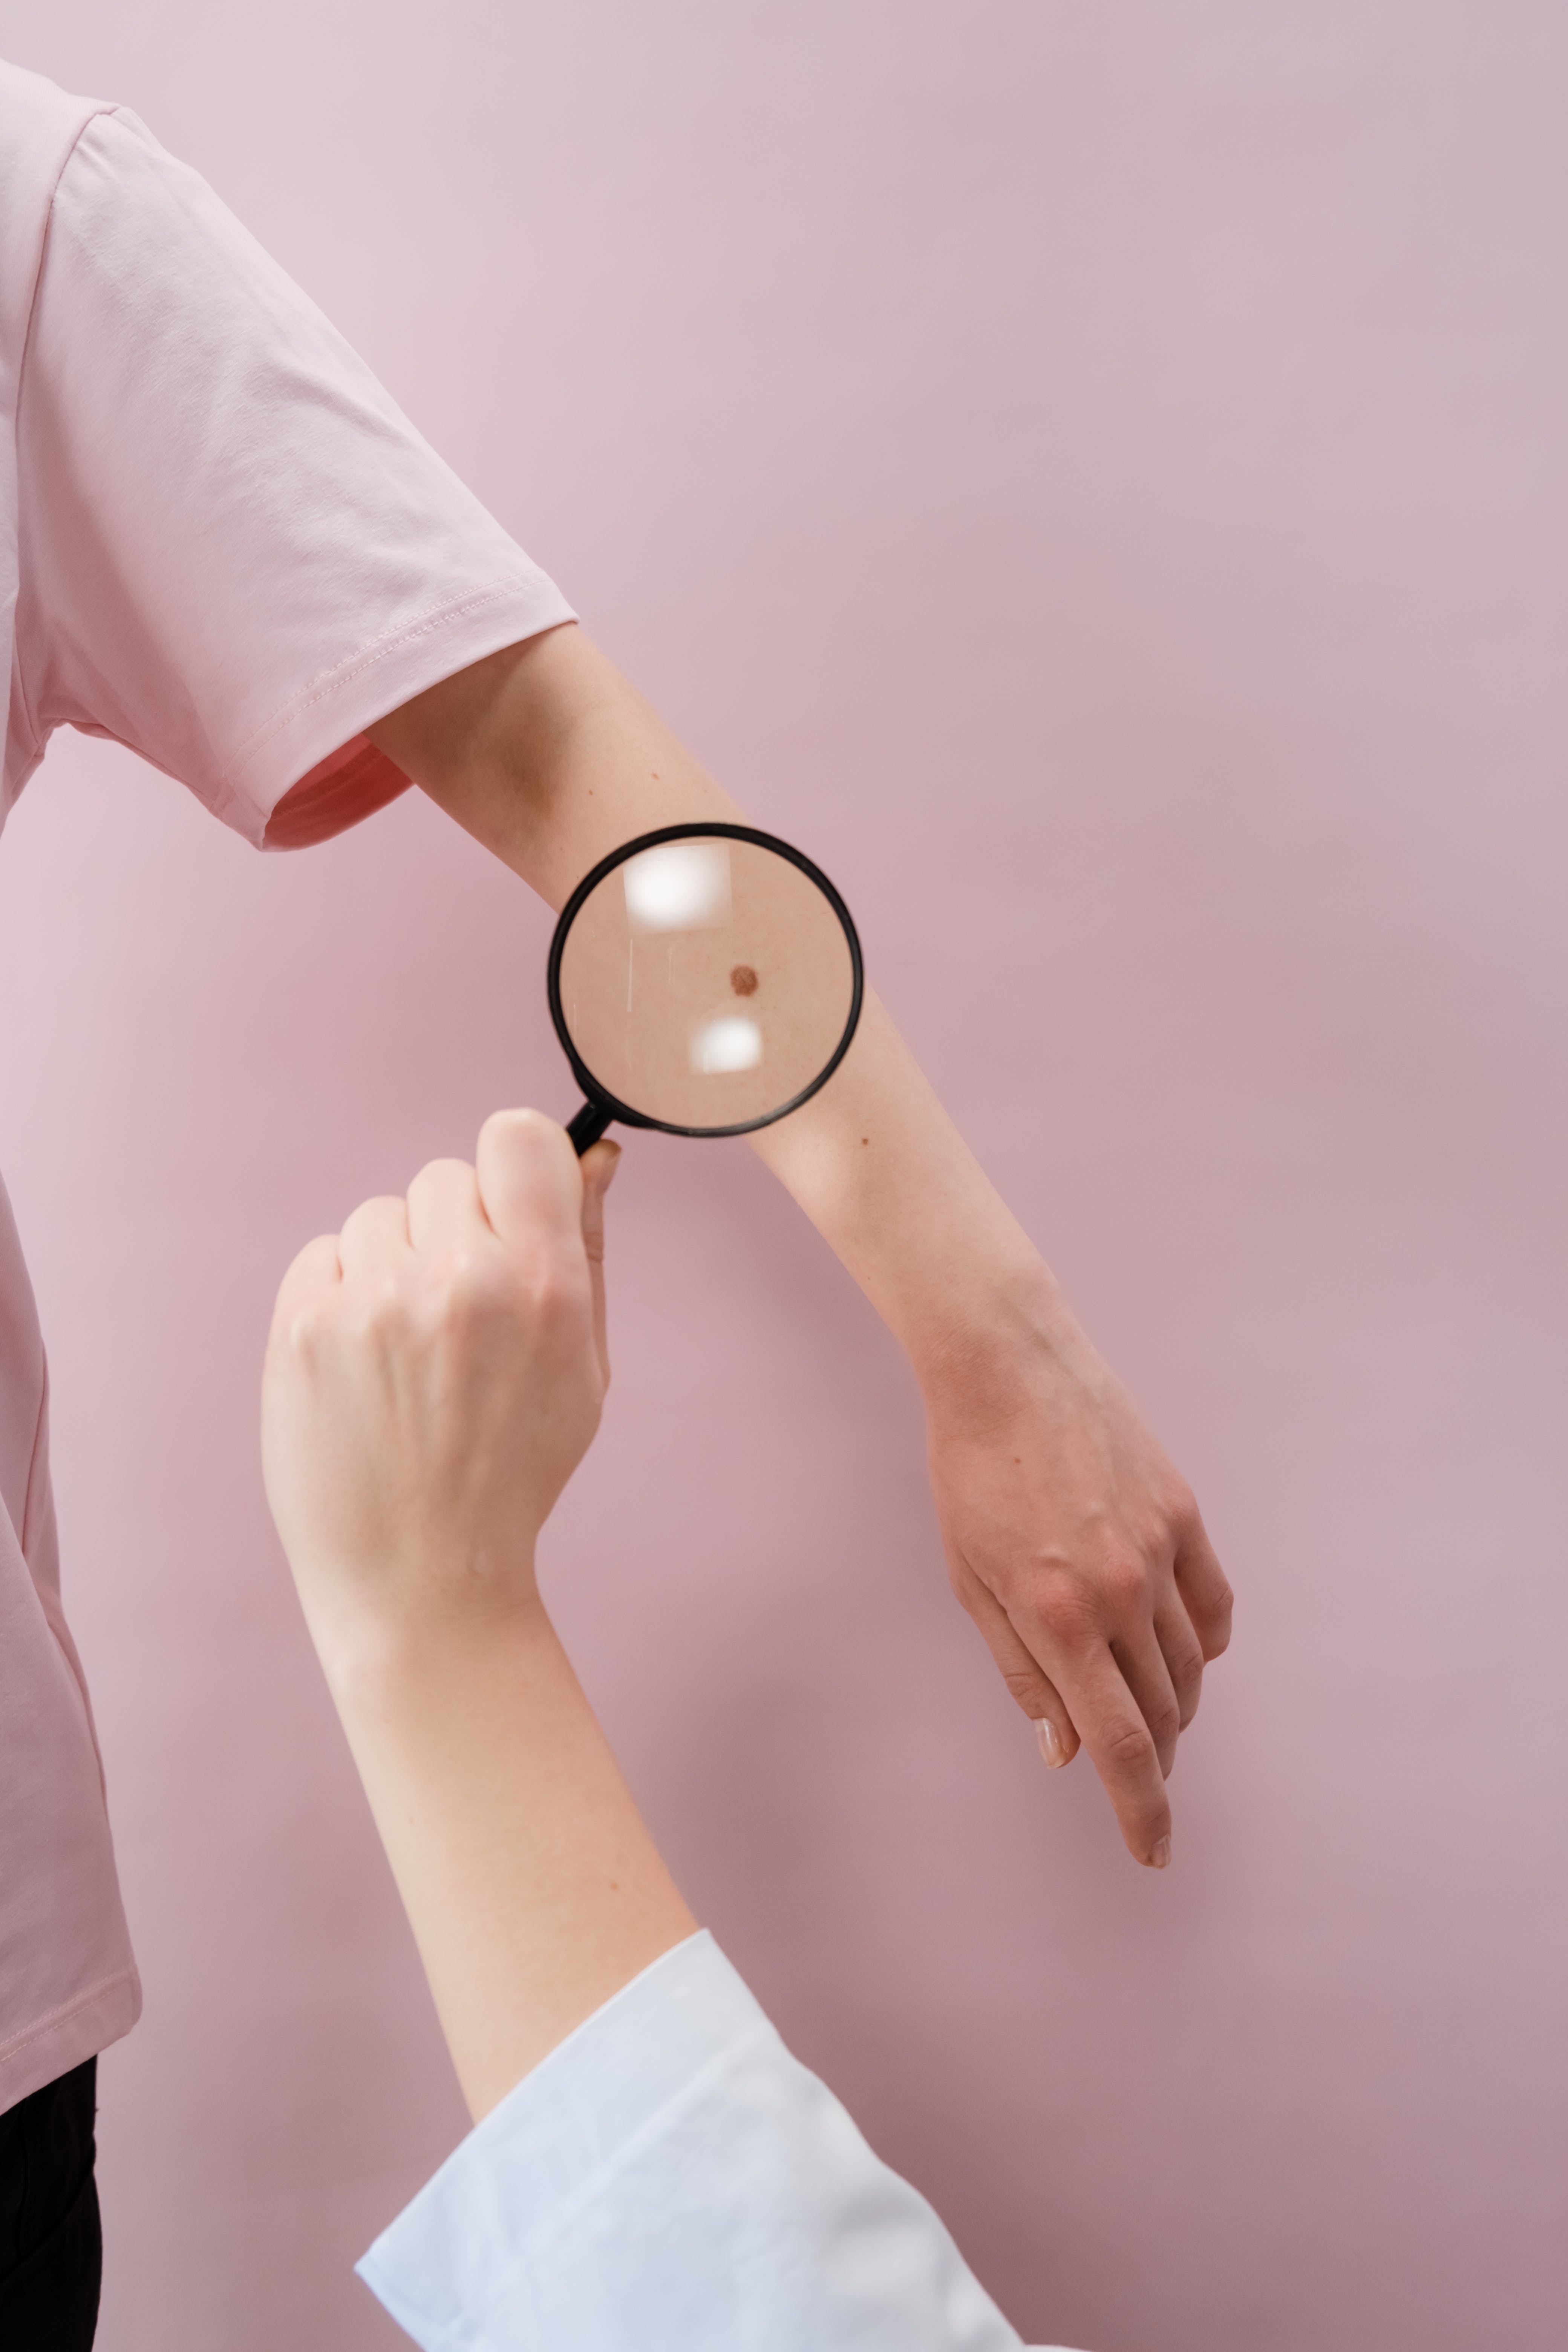 A doctor examining a patient's skin using a magnifying glass. | Source: Pexels